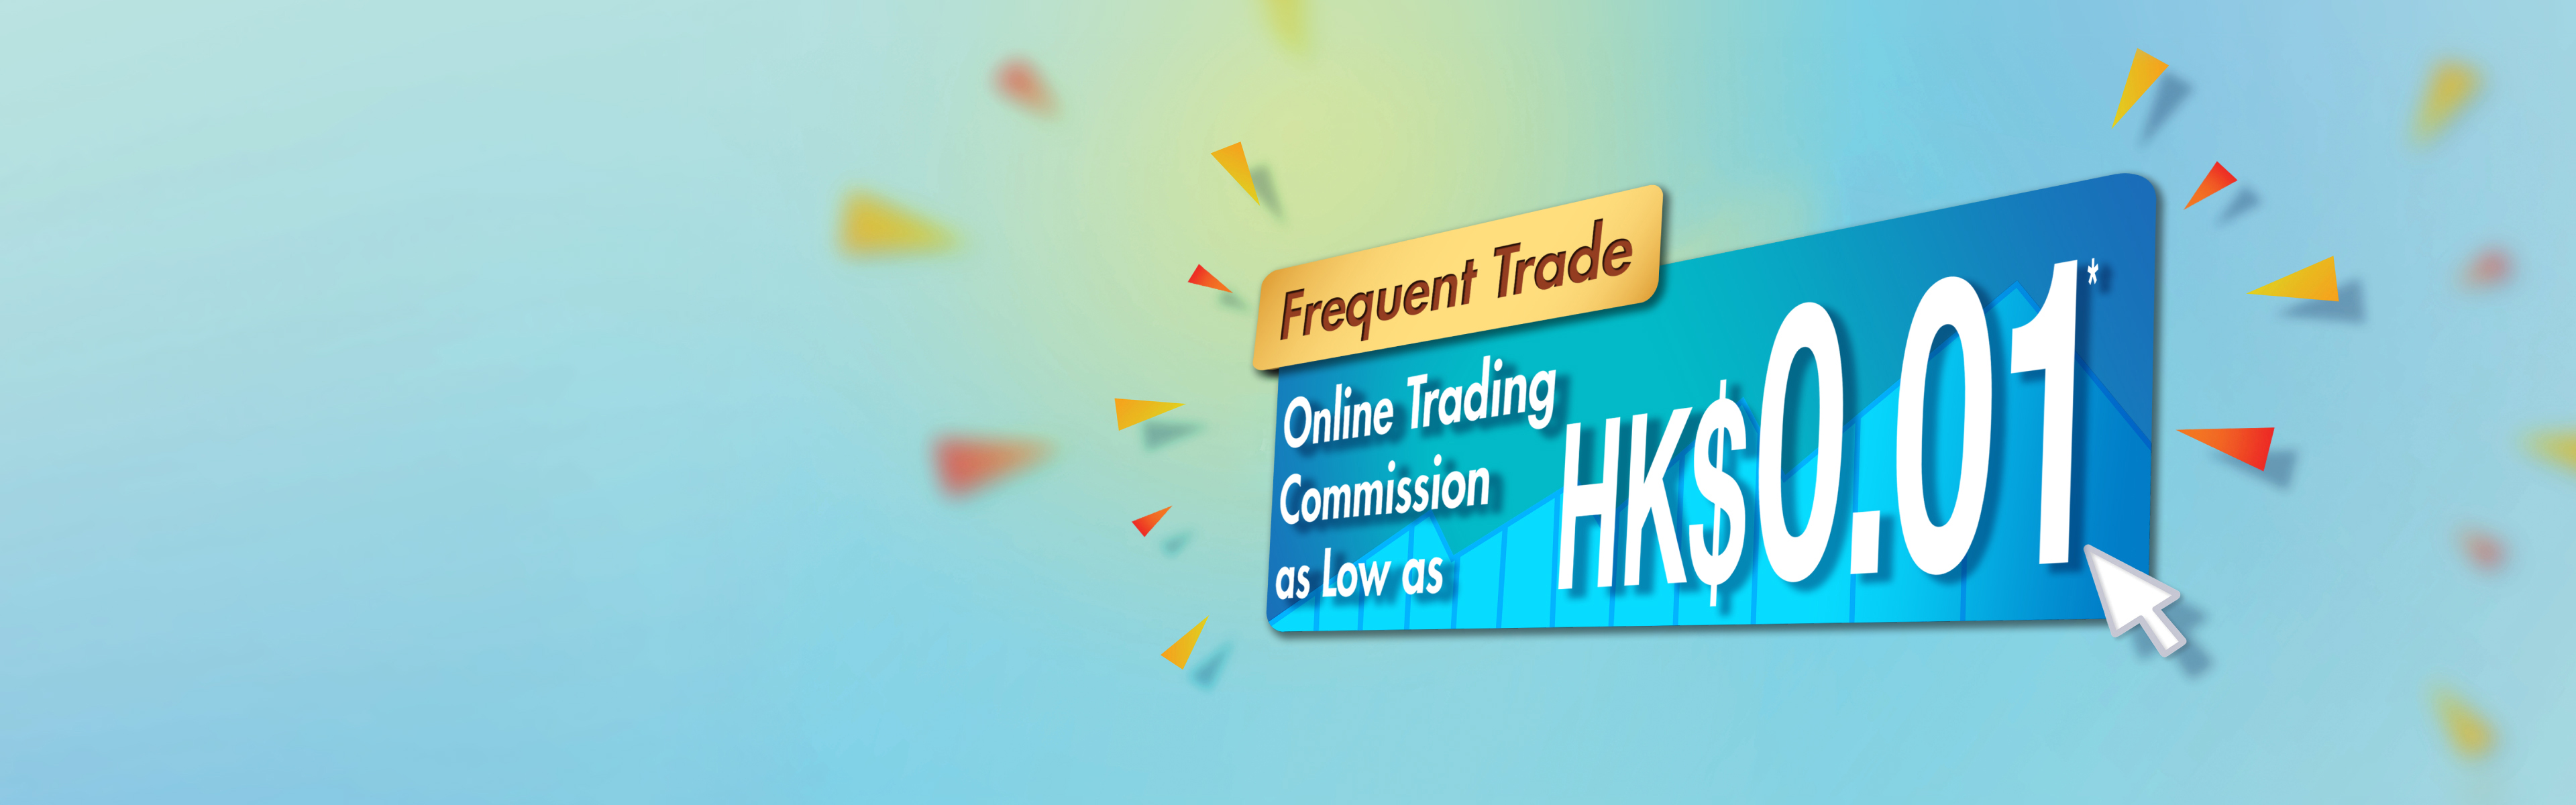 Frequent Trade HK Stocks Online Trading Offer*